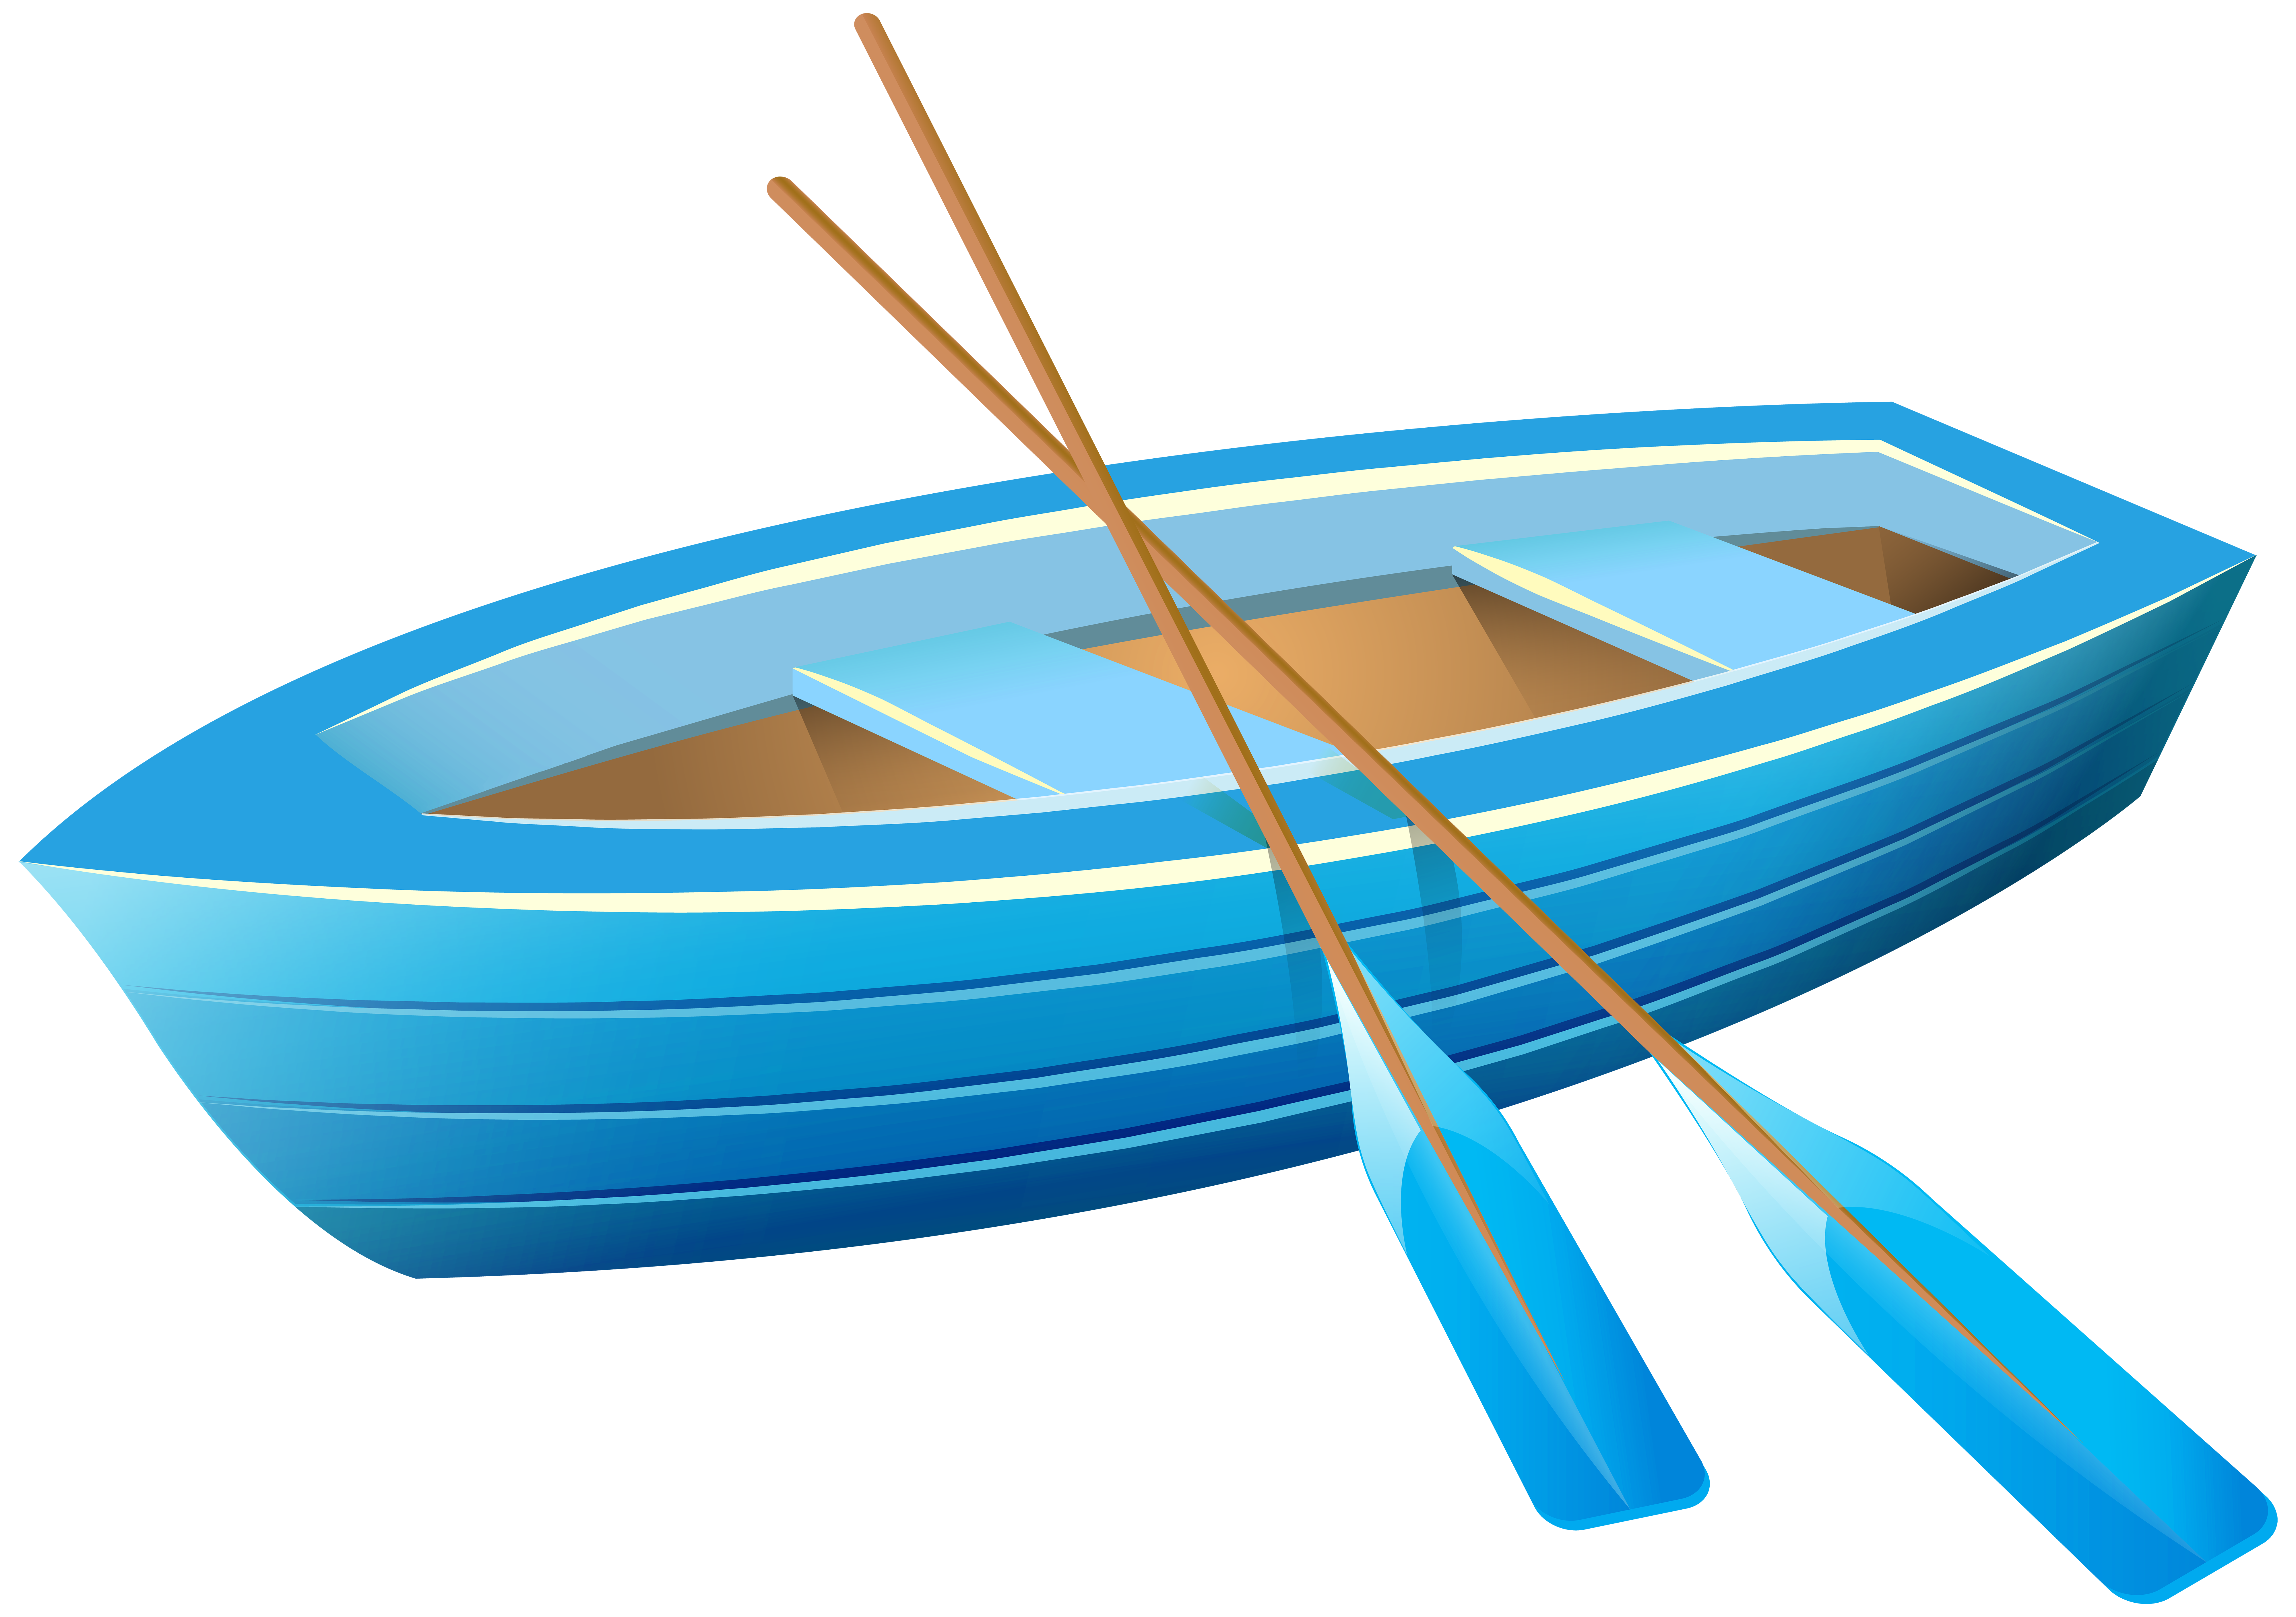 Blue Boat Transparent PNG Clip Art Image | Gallery Yopriceville ...